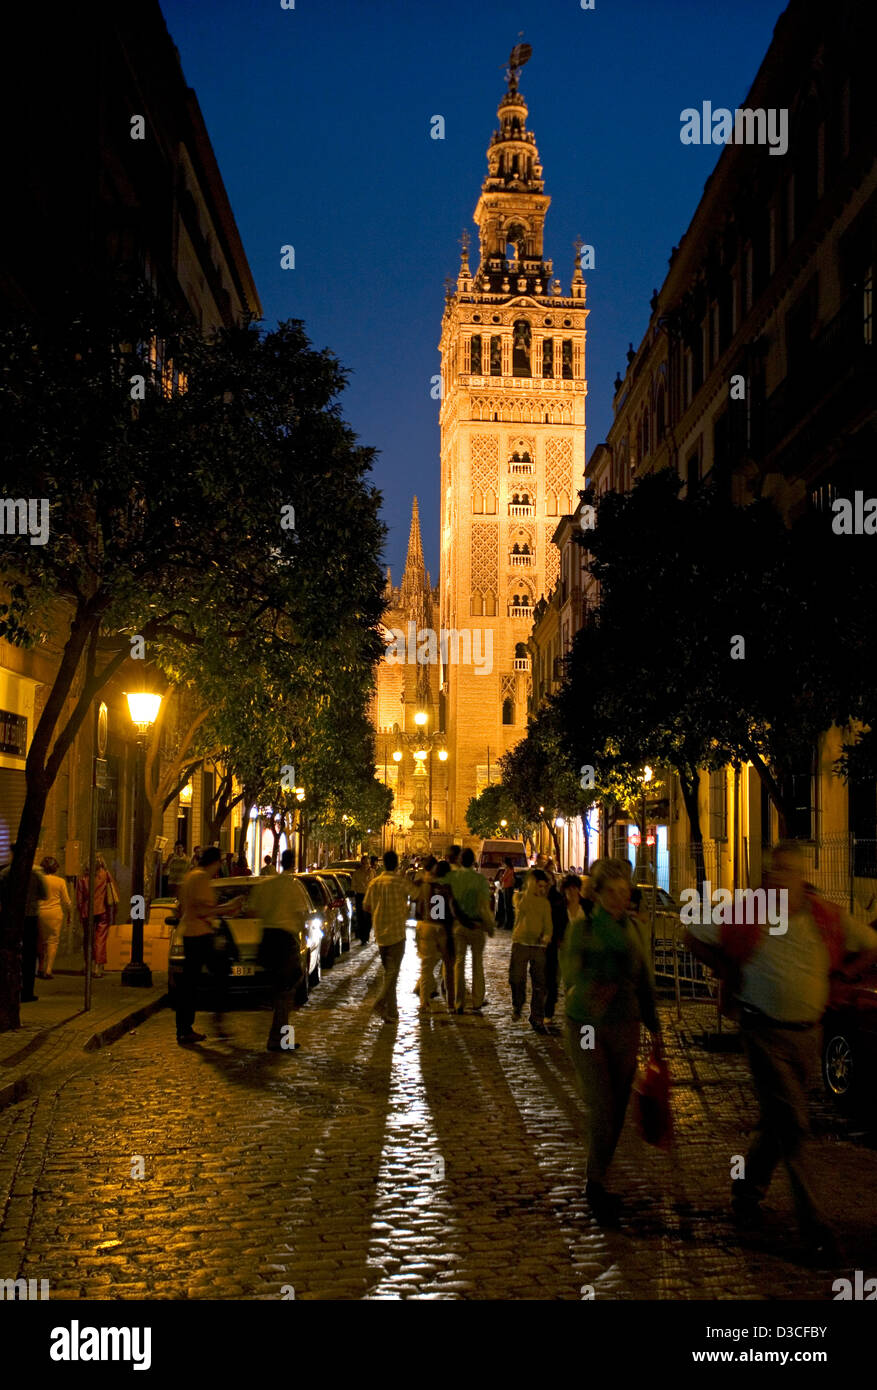 The tower and cathedral of Seville in Spain at night Stock Photo